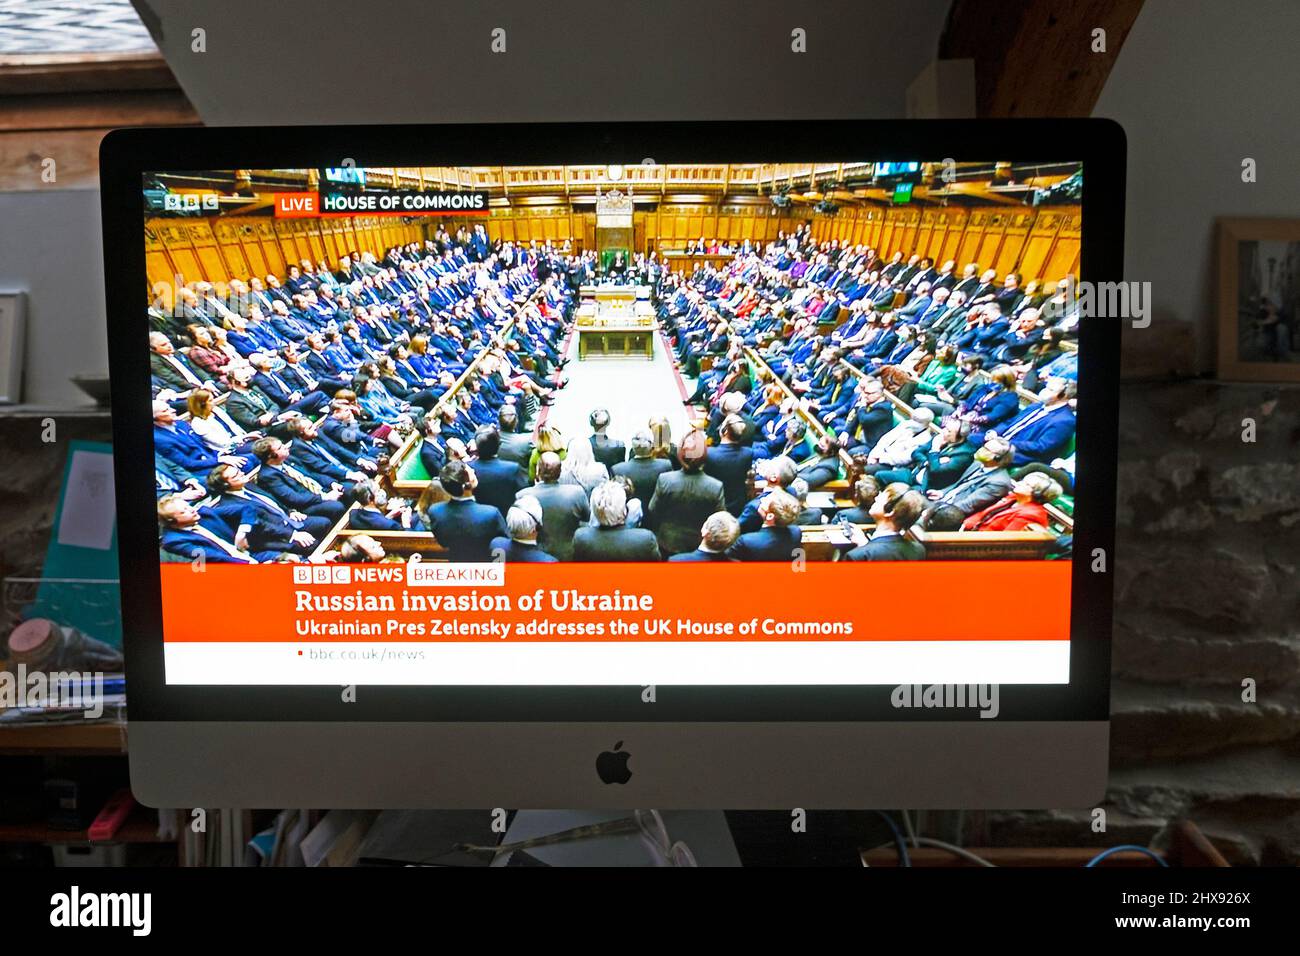 Ukraine President Zelensky speech via video link on computer screen to the House of Commons MPs members in chamber on 8 March 2022 London England UK Stock Photo